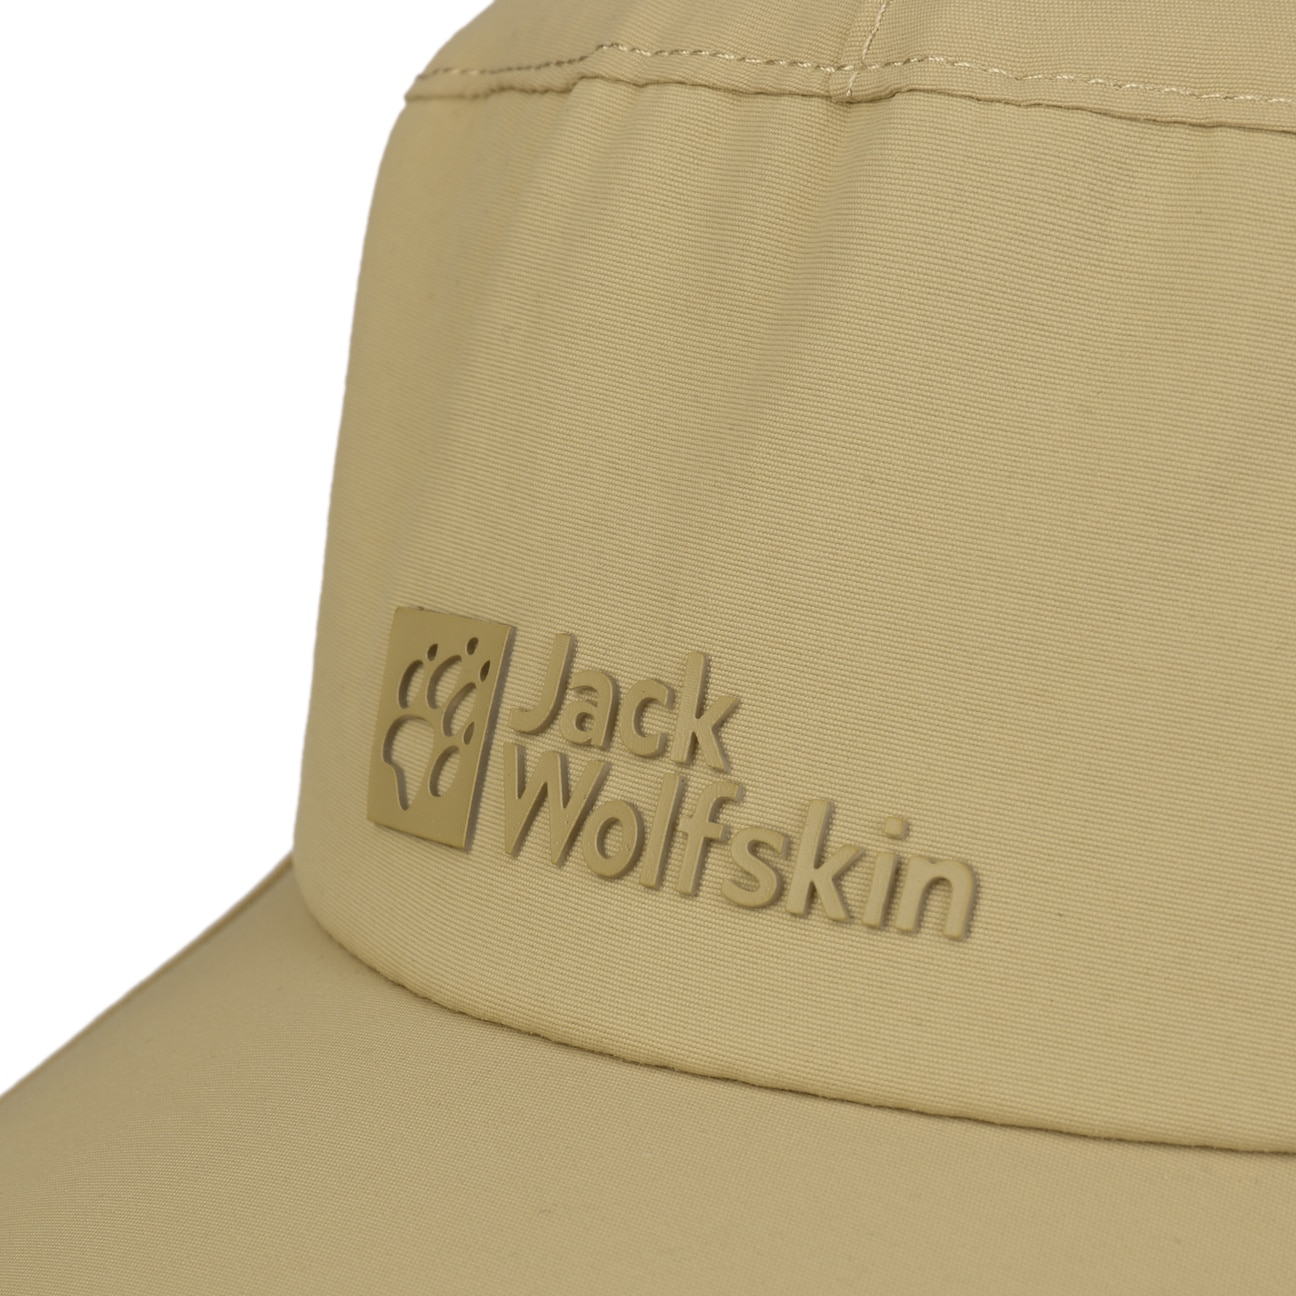 by Canyon Jack Wolfskin 53,95 Cap - €